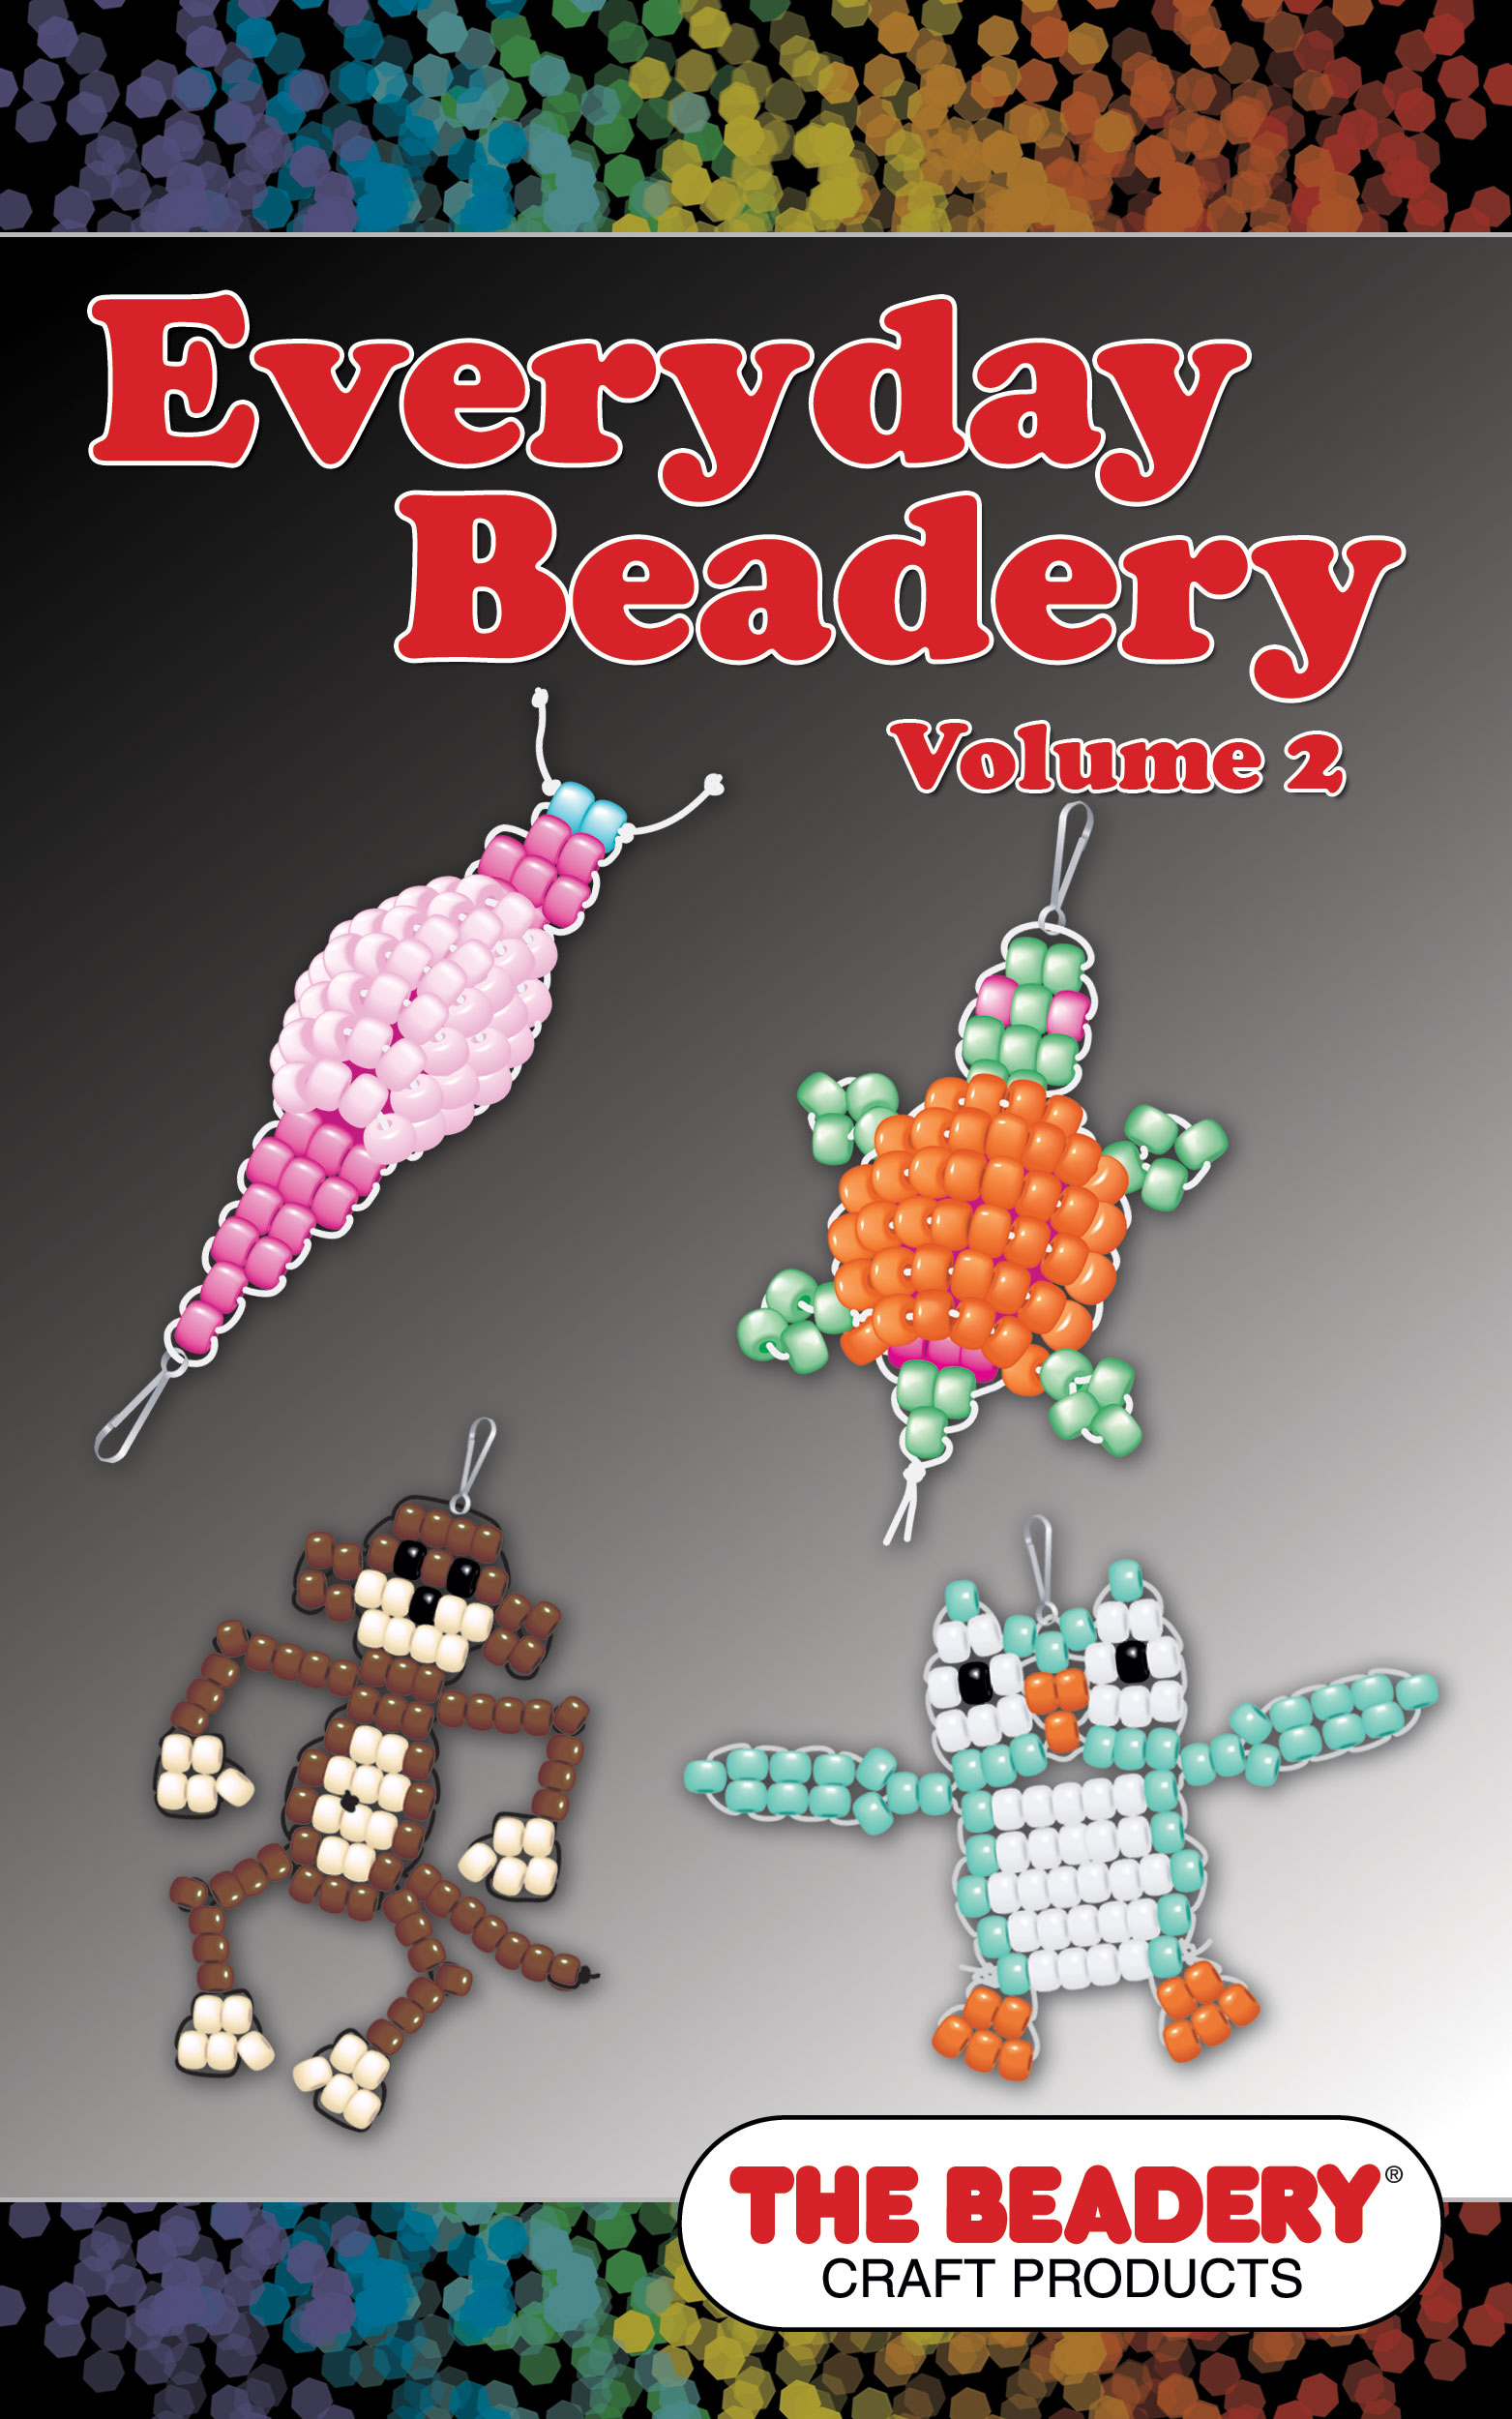 Everyday Beadery Vol. 2 – Featuring the Beady Buddies